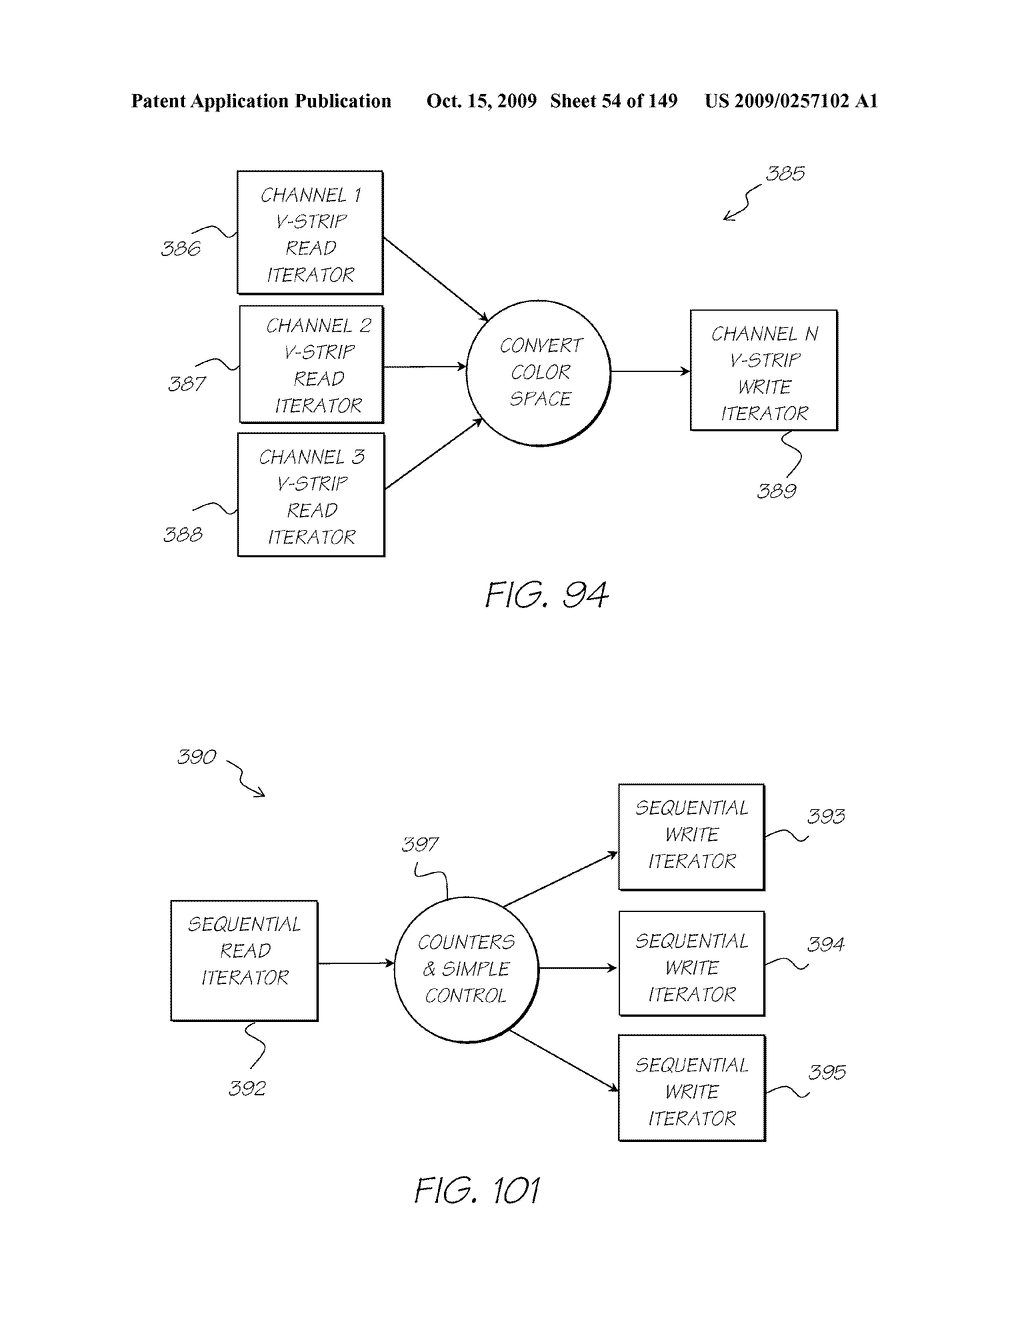 IMAGE PROCESSING APPARATUS HAVING CARD READER FOR APPLYING EFFECTS STORED ON A CARD TO A STORED IMAGE - diagram, schematic, and image 55